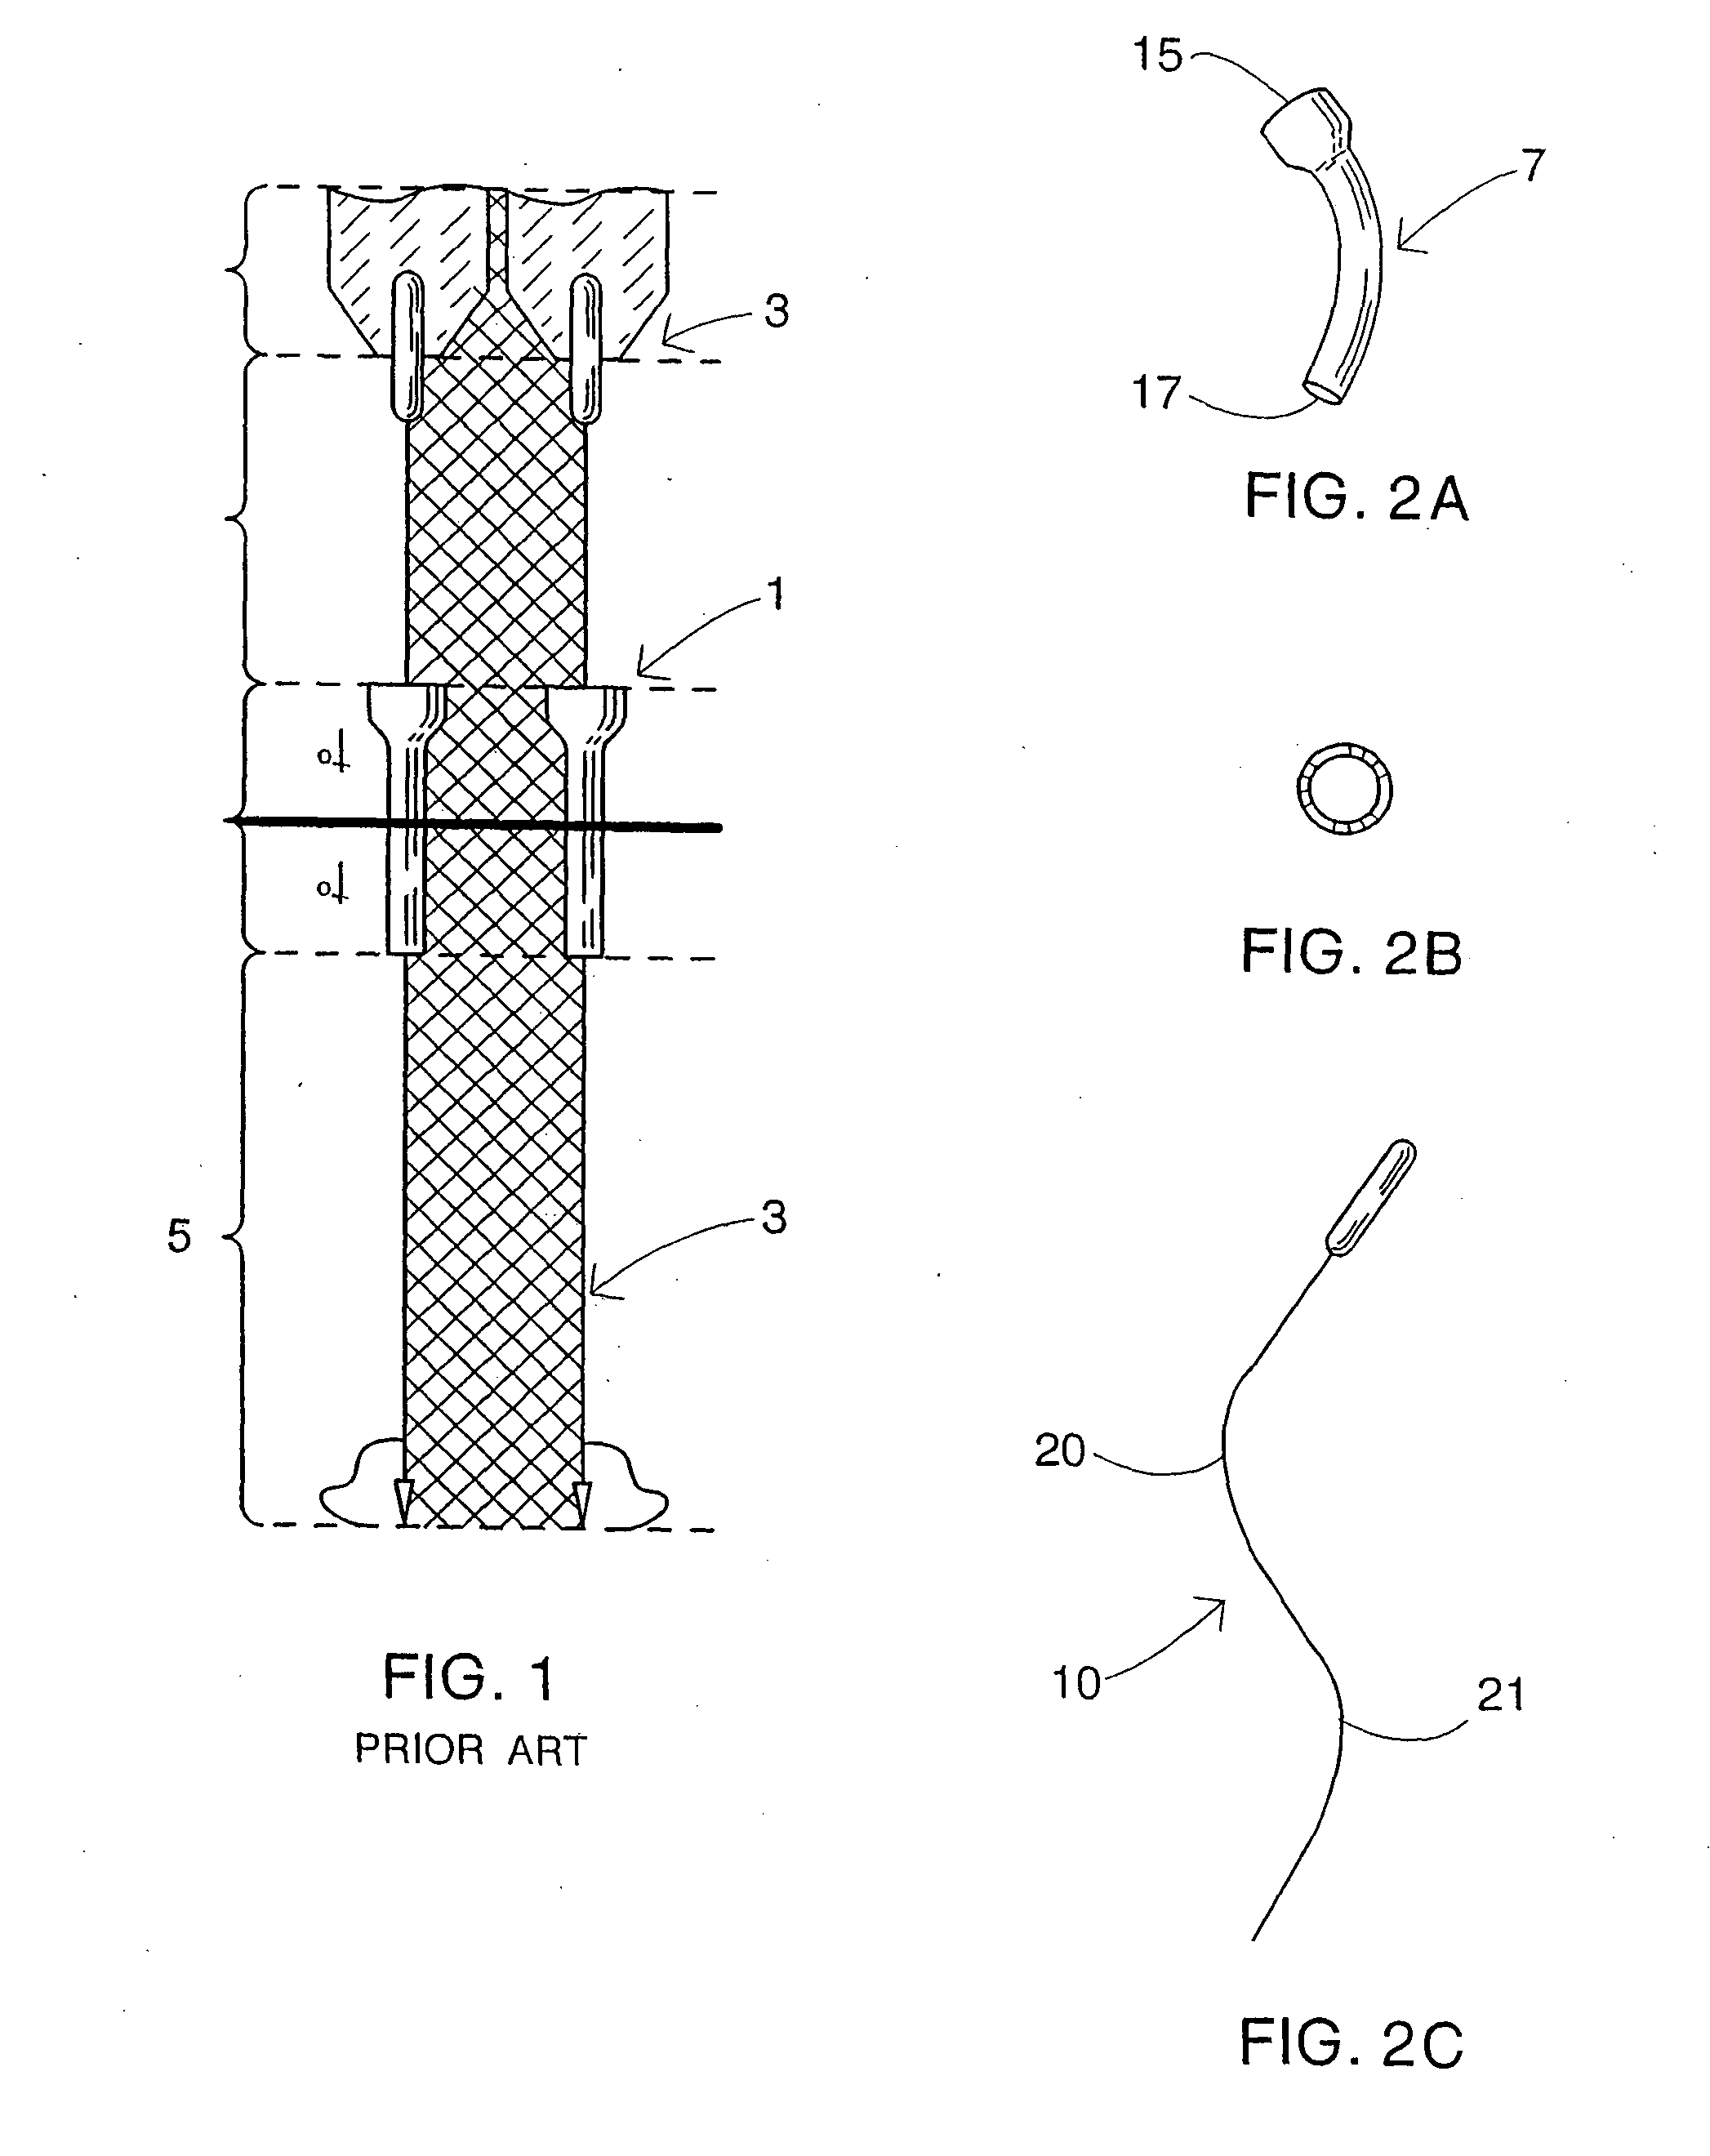 Laparoscopic instrument and trocar system and related surgical method